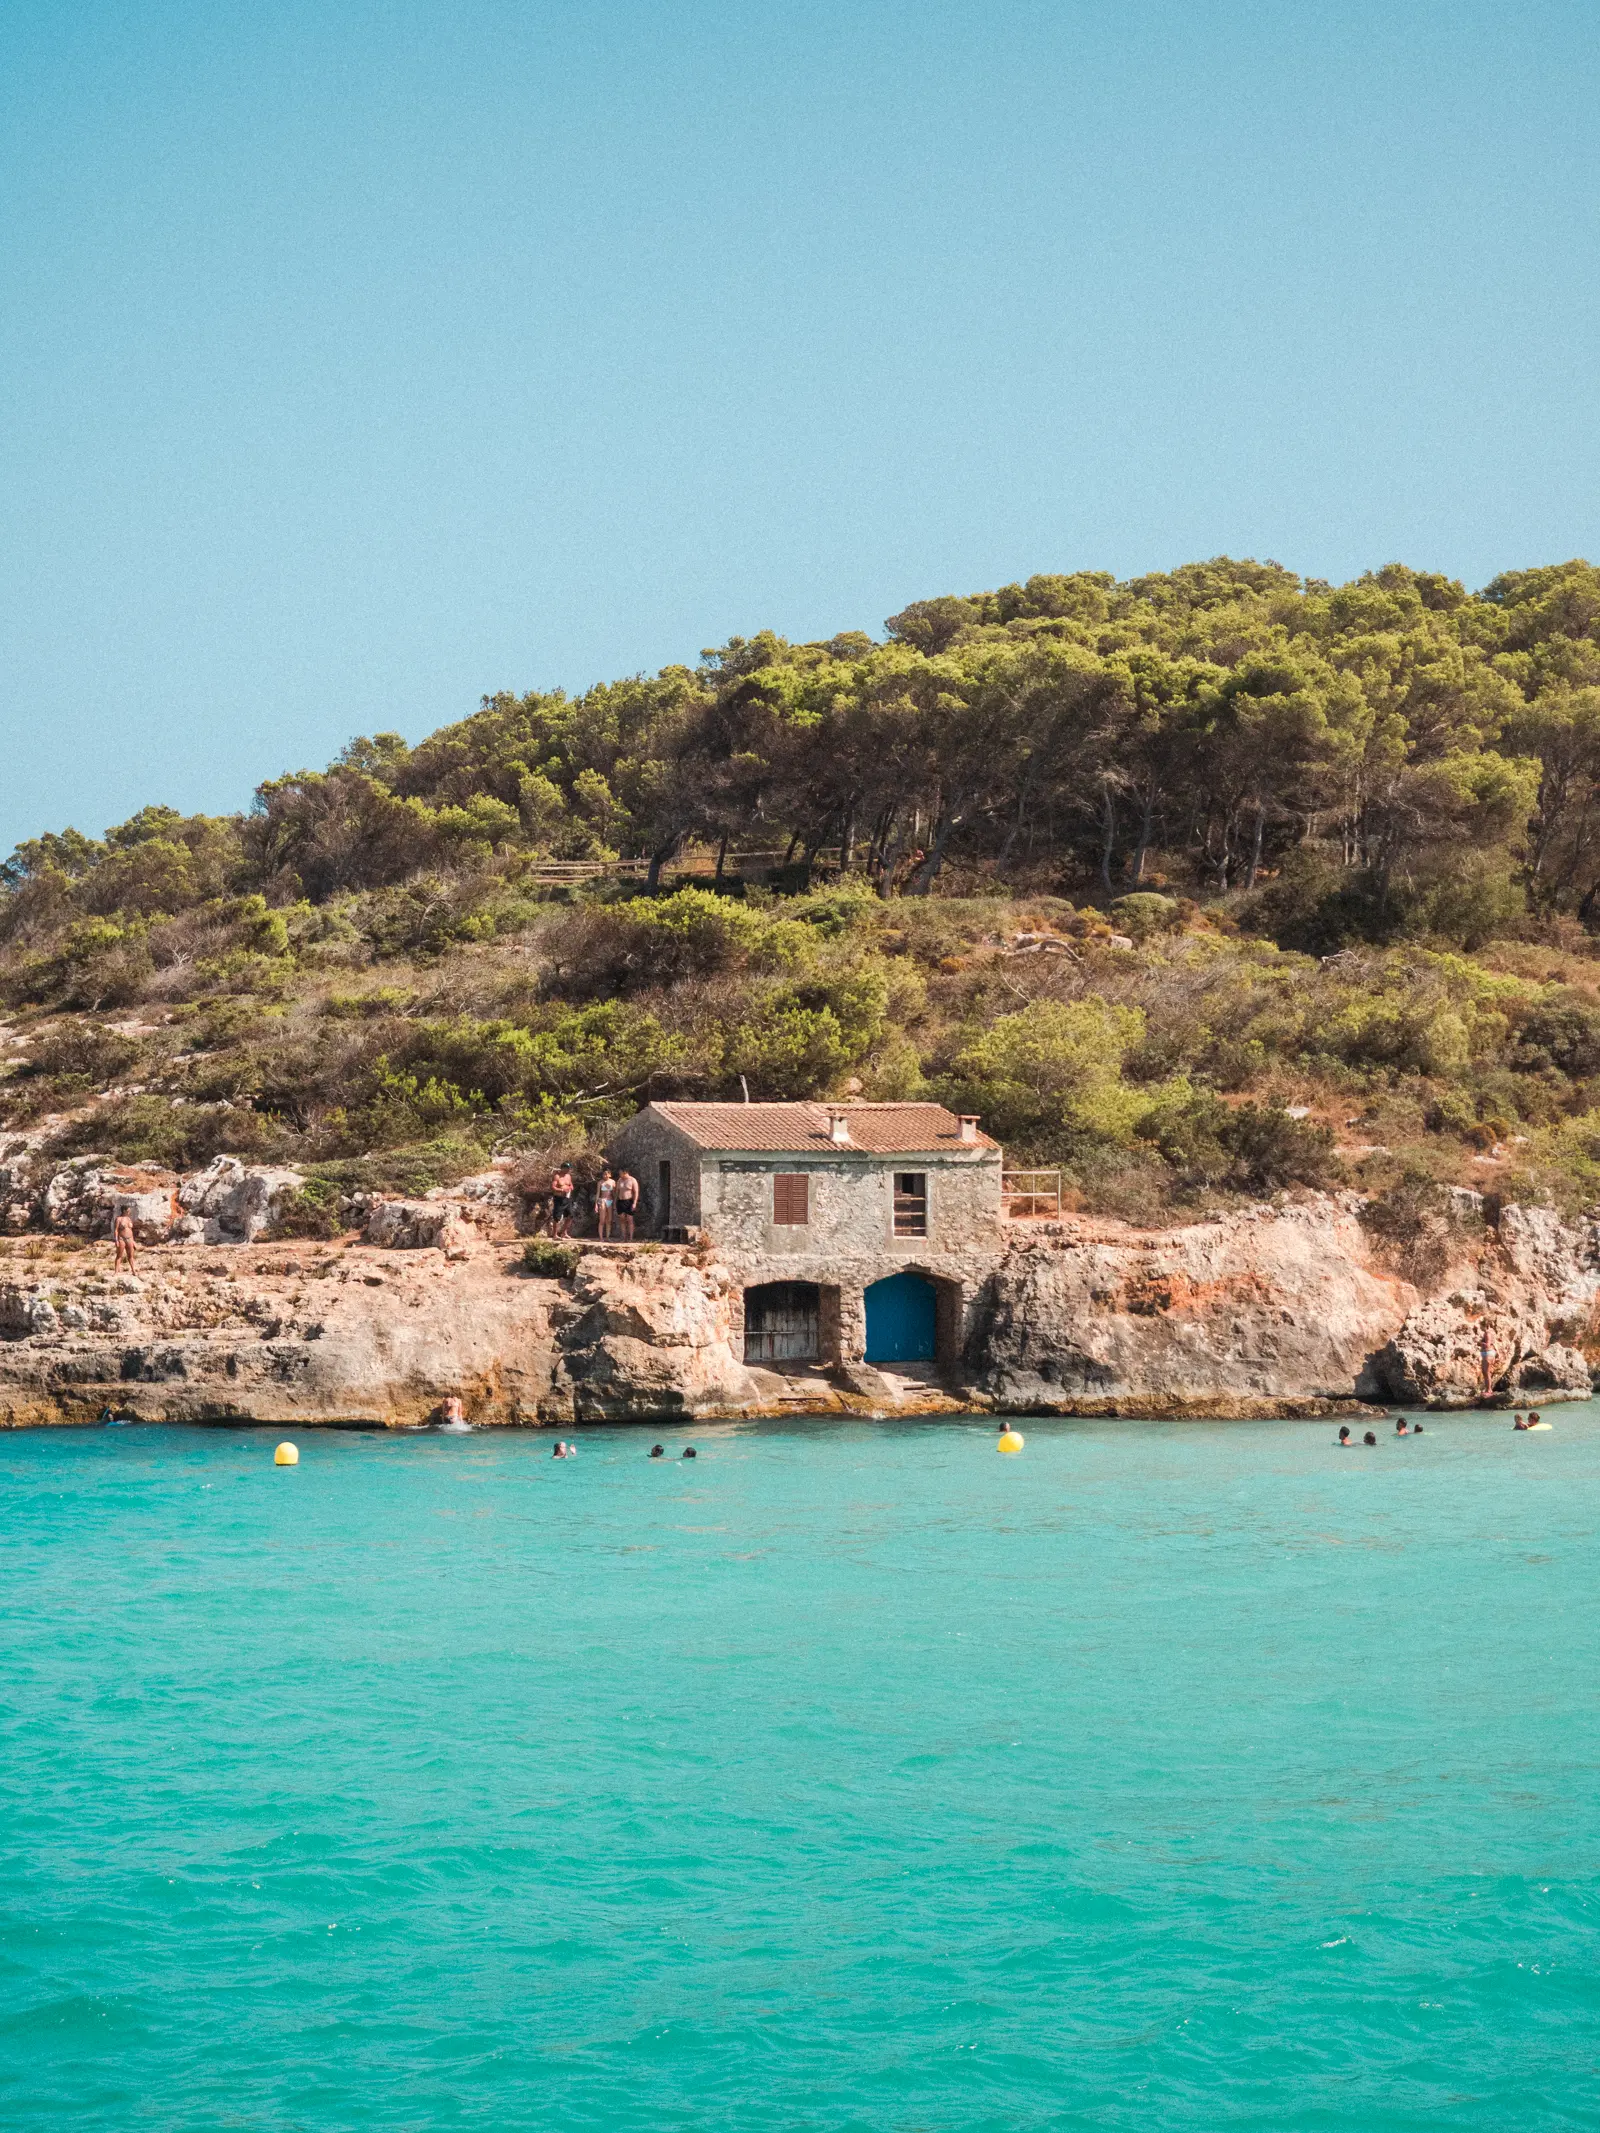 Mallorca - Old stone fisherman's house with dark blue doors down by the turquoise ocean at Cala S'Amarador, one of my favorite beaches in Mallorca